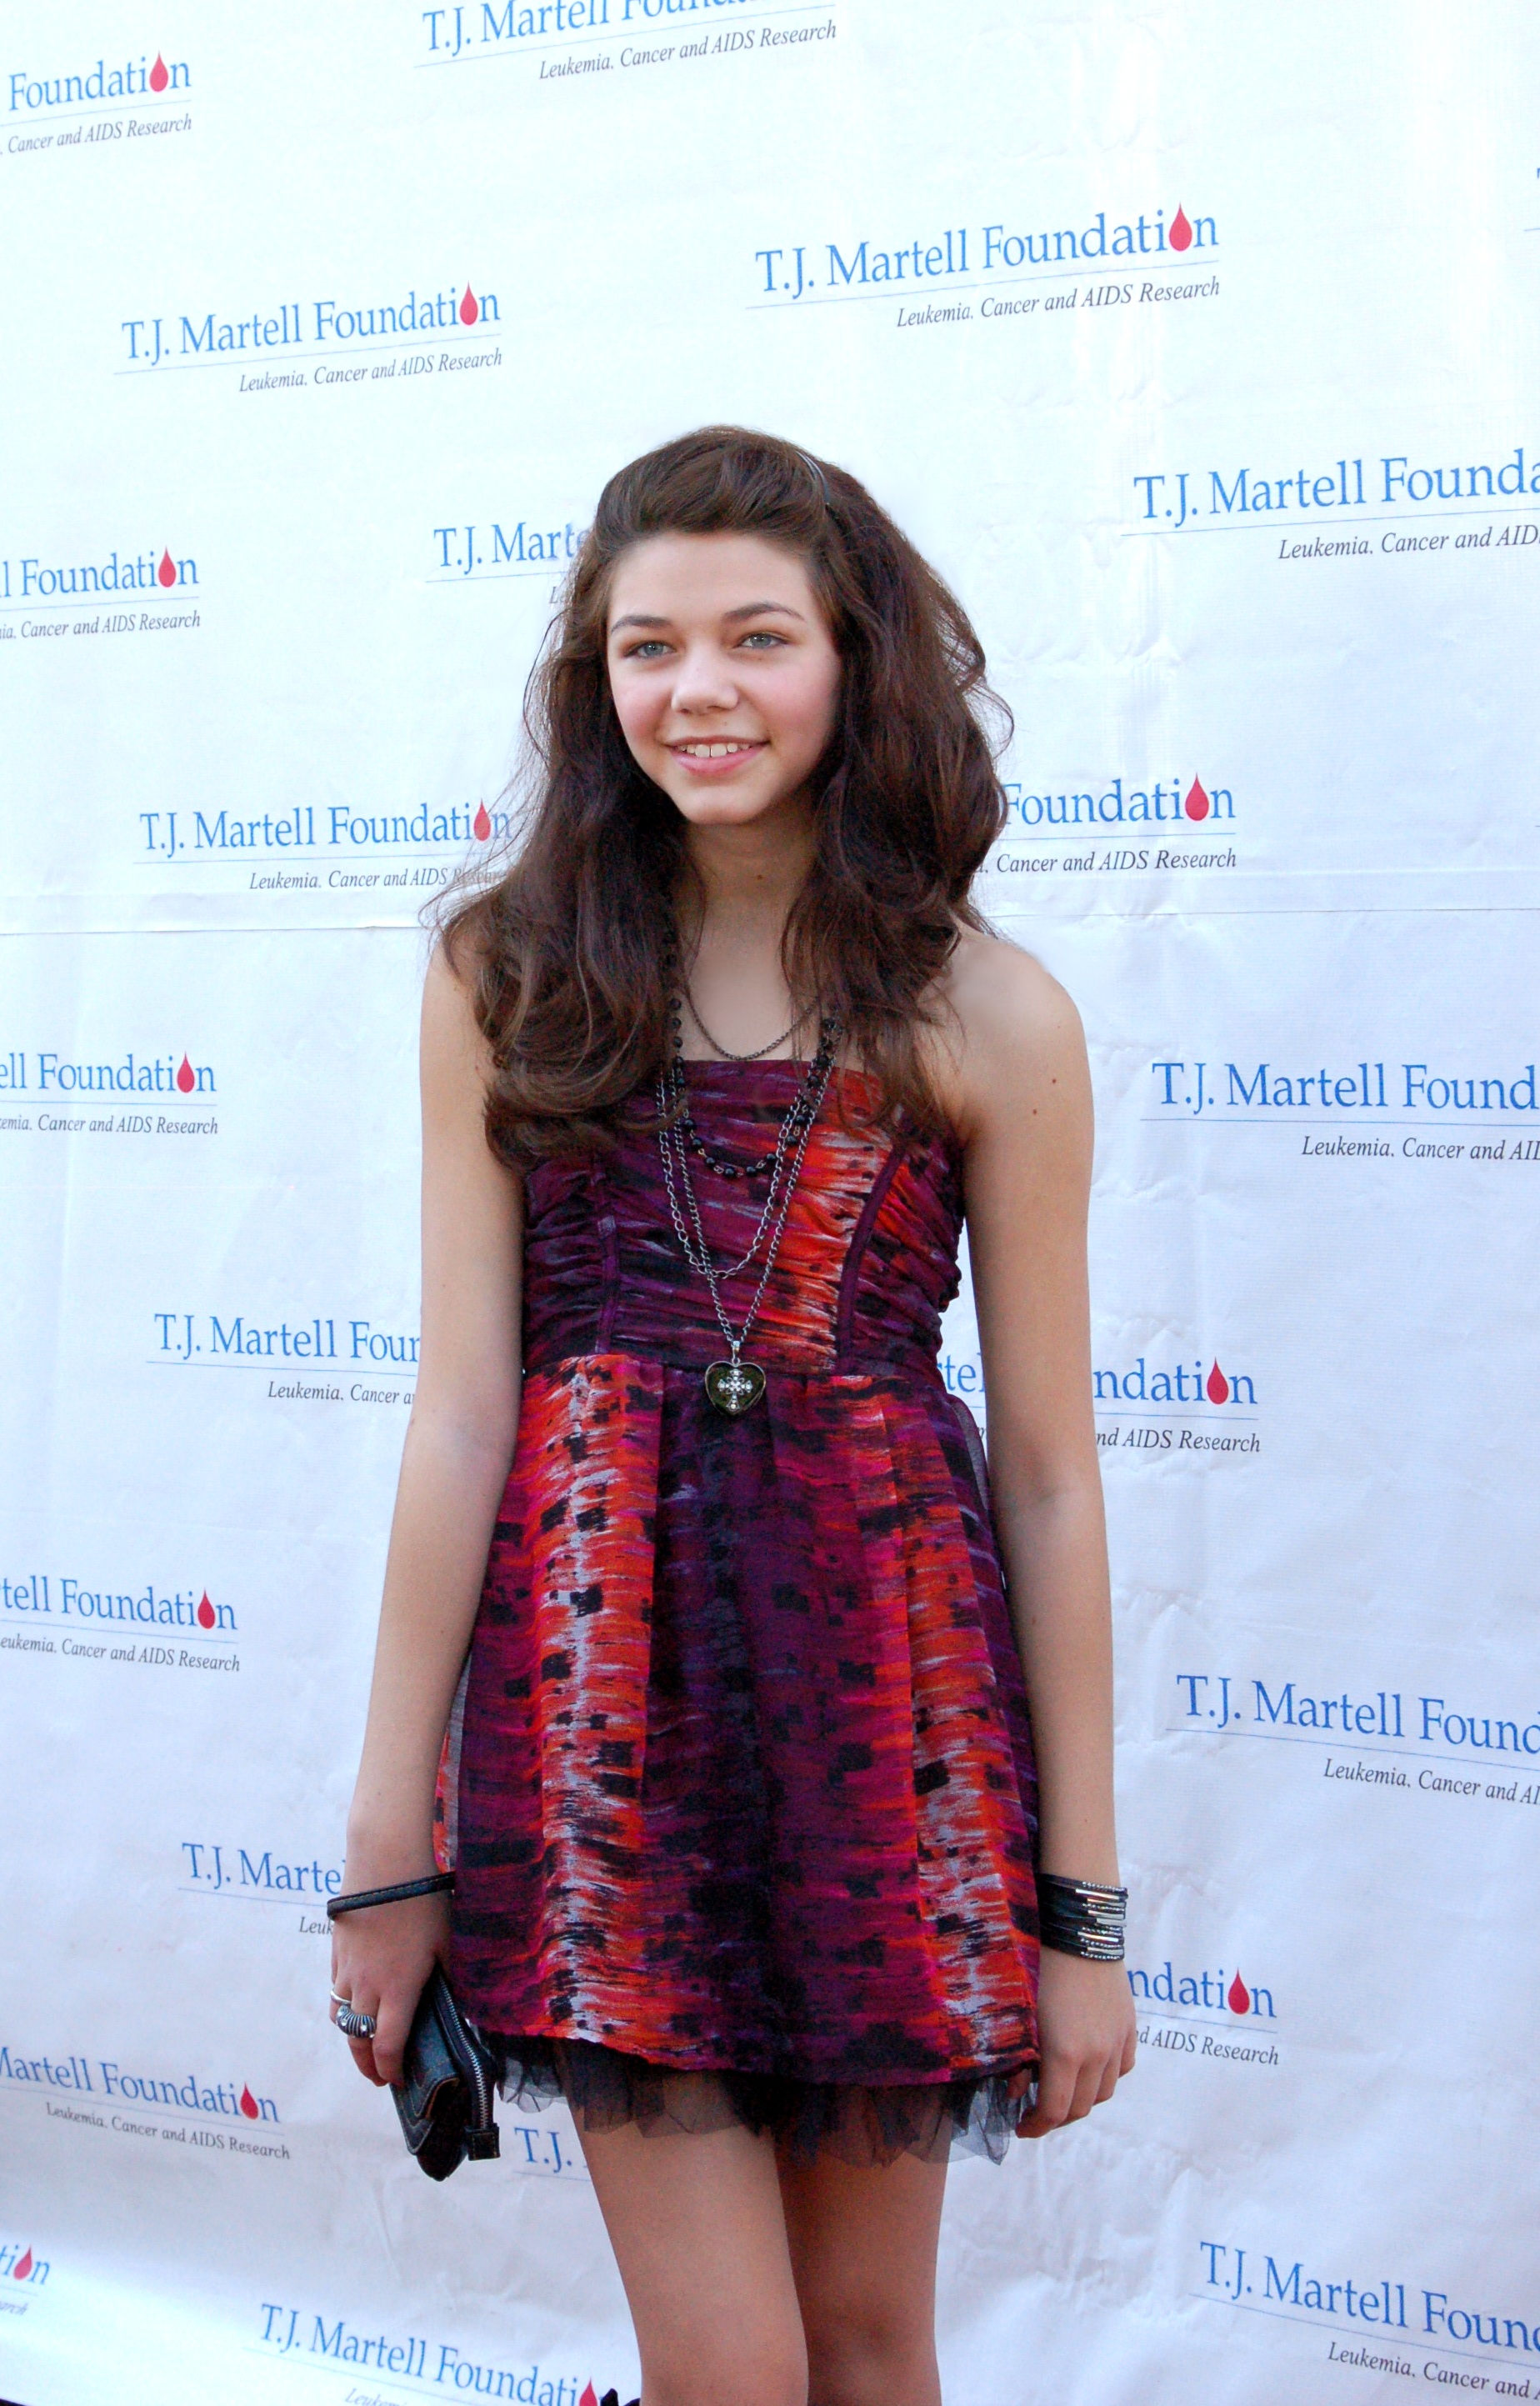 Bryce on the Red Carpet at the T.J.Martell Charity Event and Family Fun Day - CBS Studio City, CA